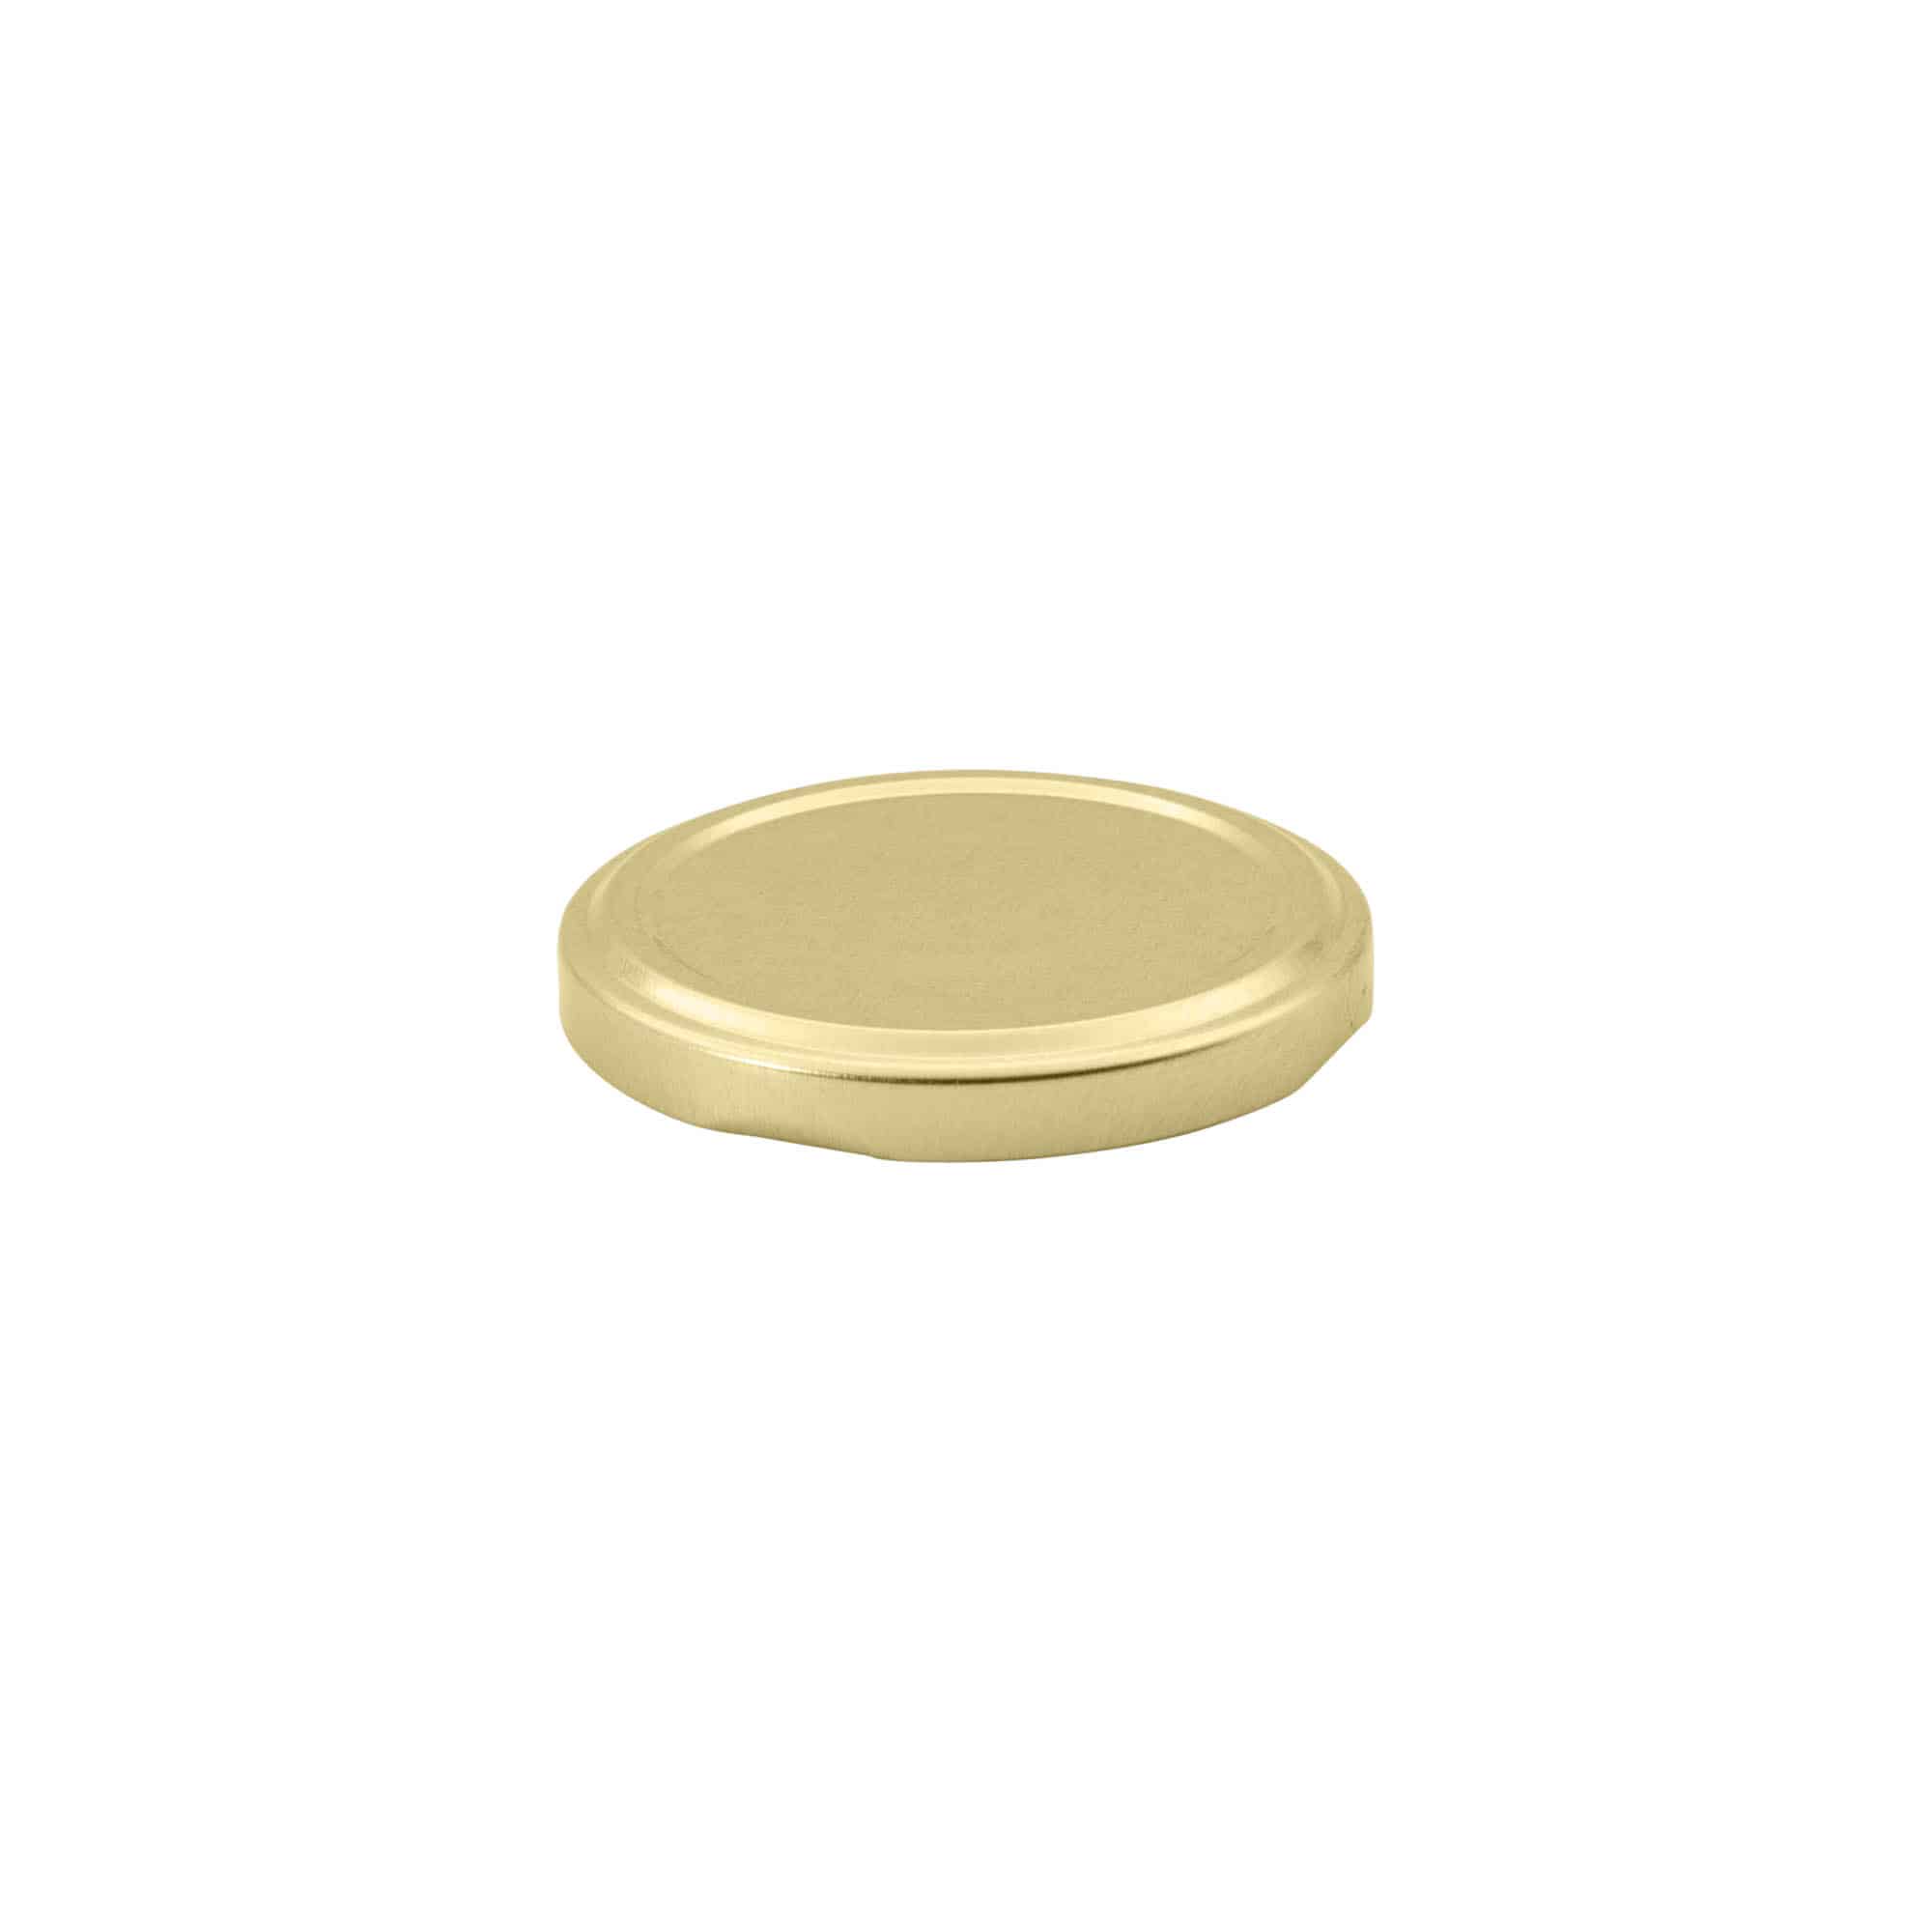 Twist off lid, tinplate, gold, for opening: TO 63